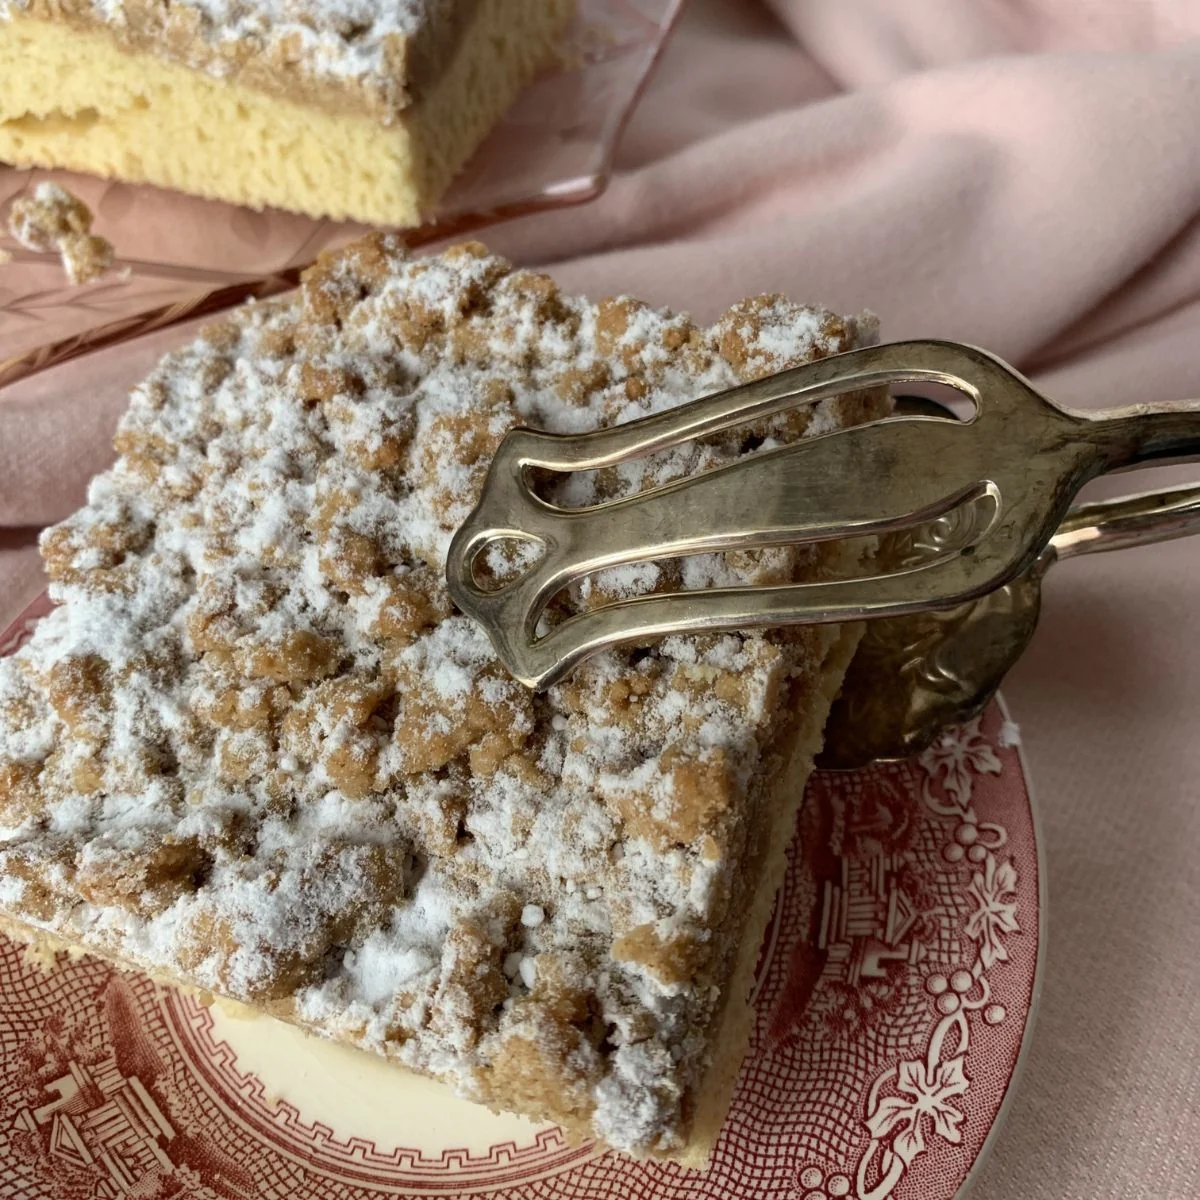 This is a photo of a piece of coffee cake on a plate.